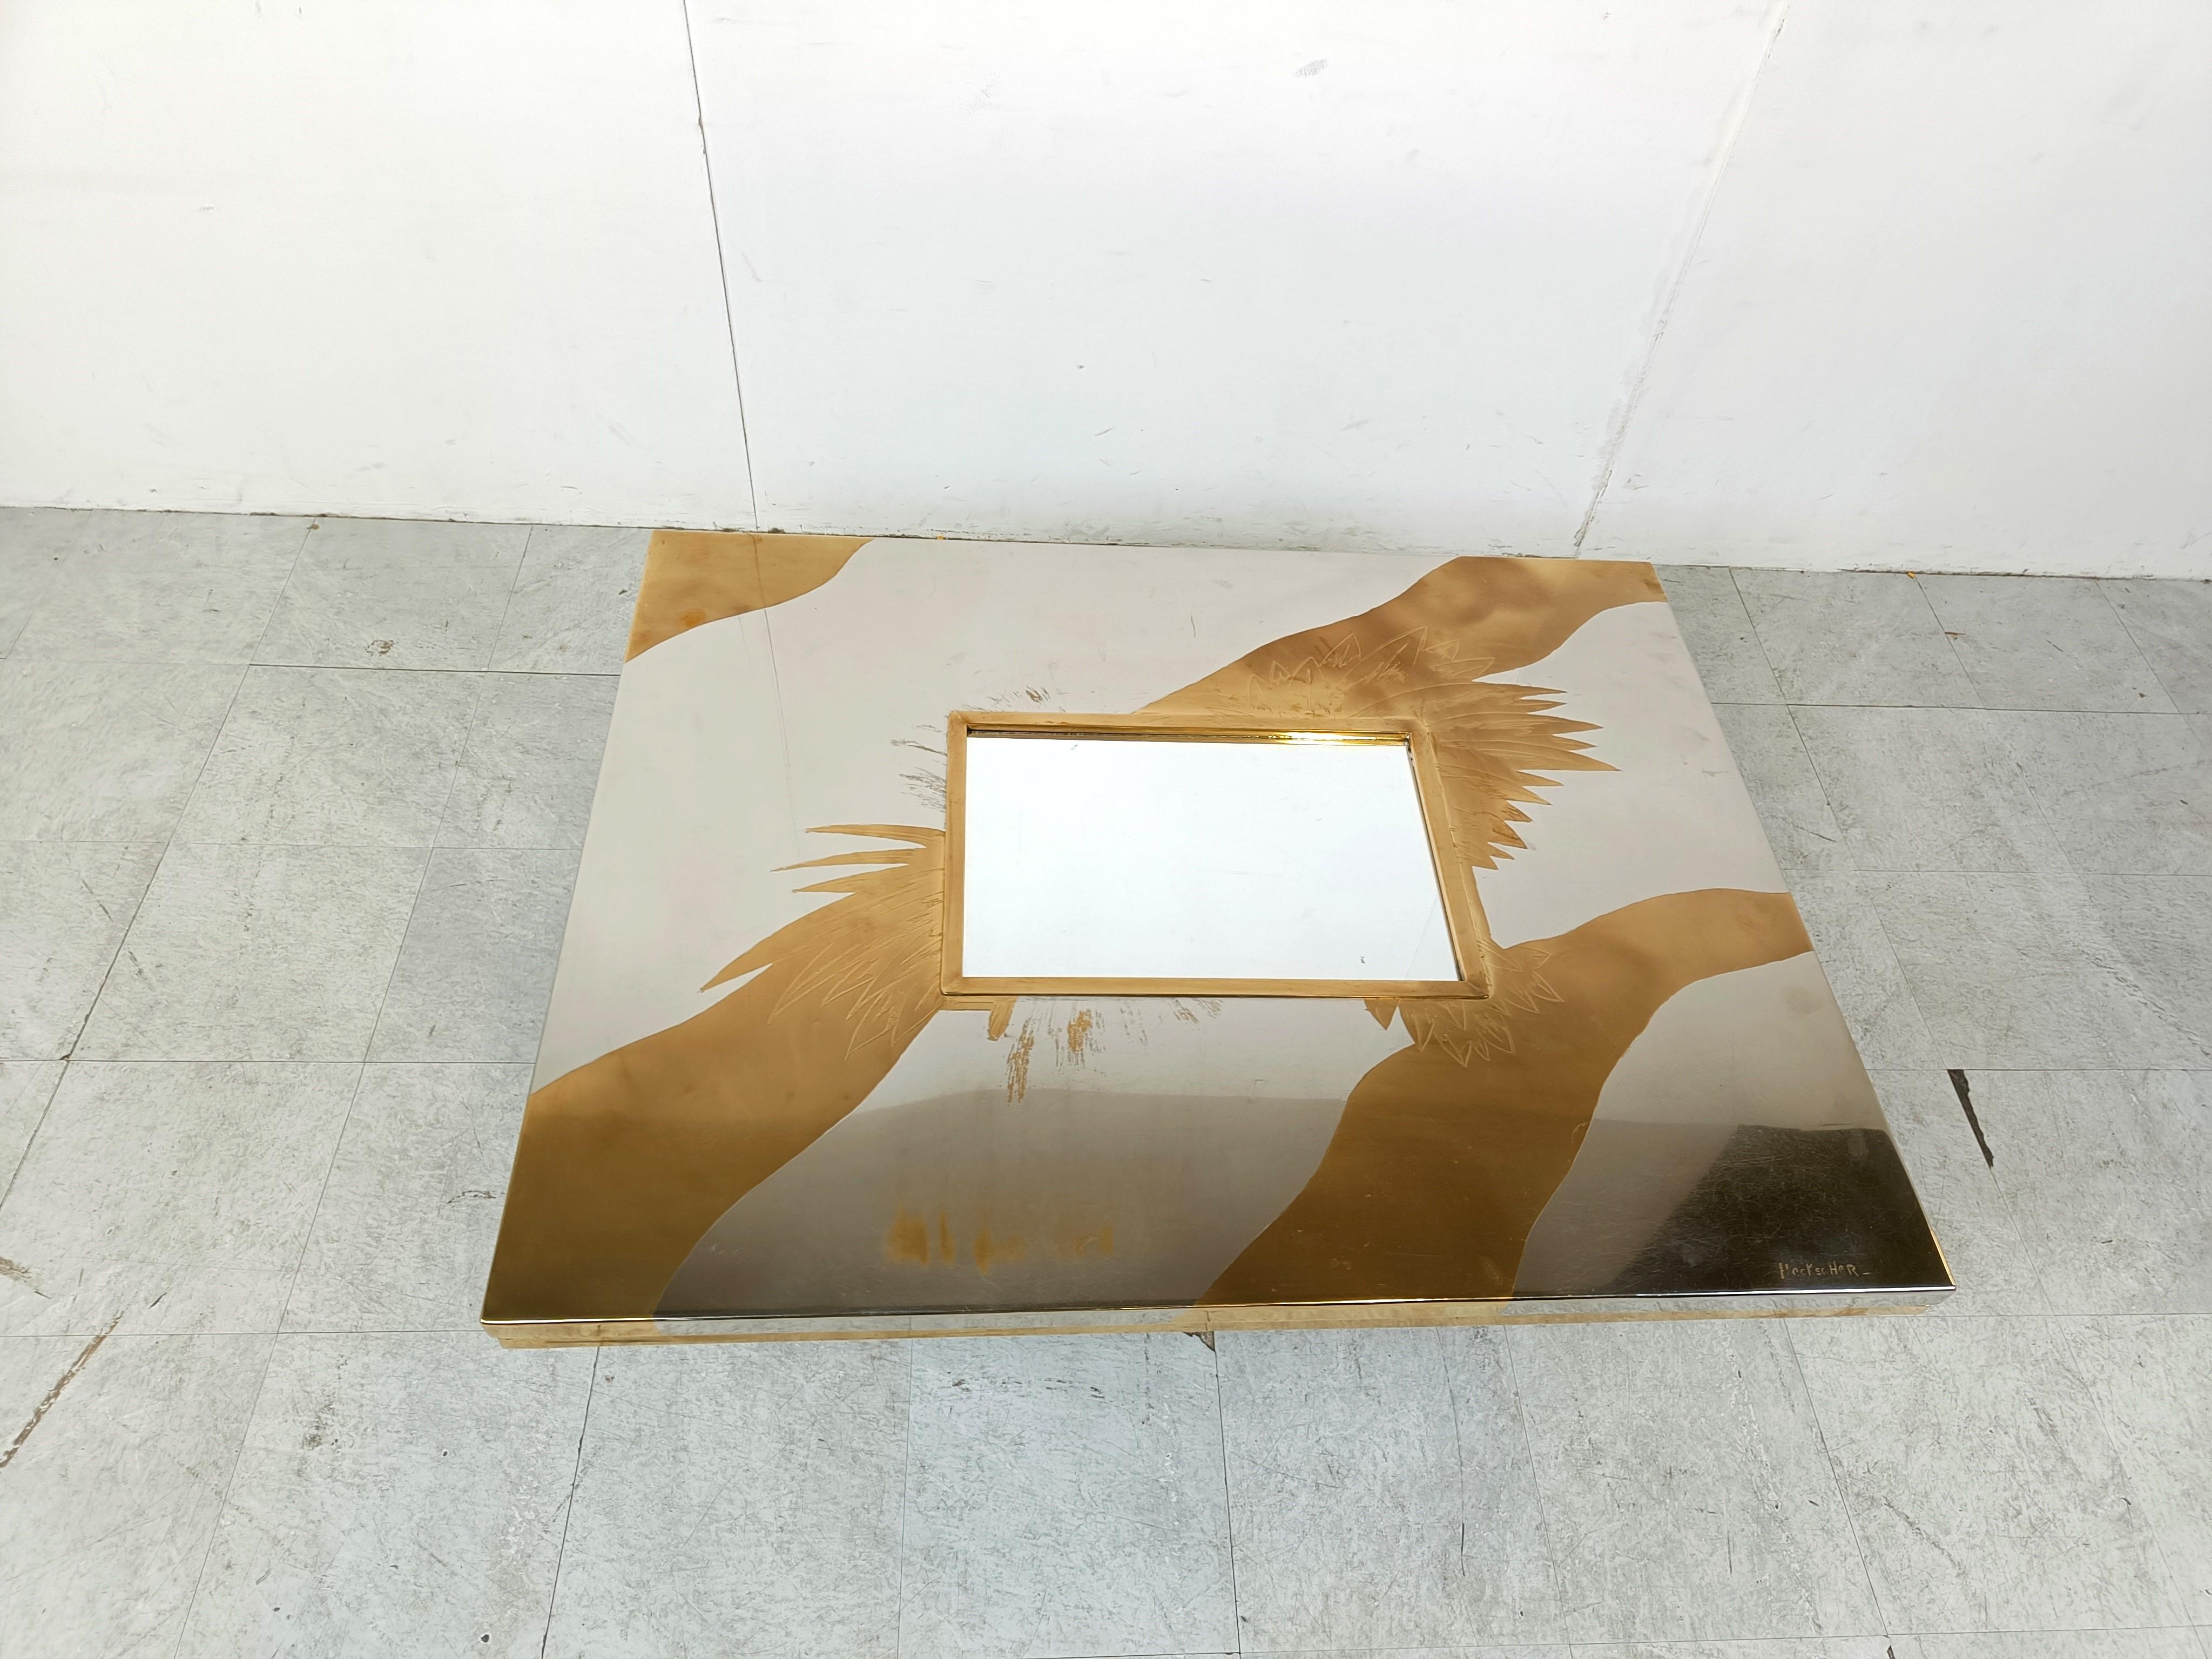 Very rare coffee table by Christian  Heckscher consisting of an etched brass and chrome table top with an inlaid mirrored glass.

Leaf engravings and organic waves of brass contrasting nicely with the chromed table top.

Black metal base.

Signed by